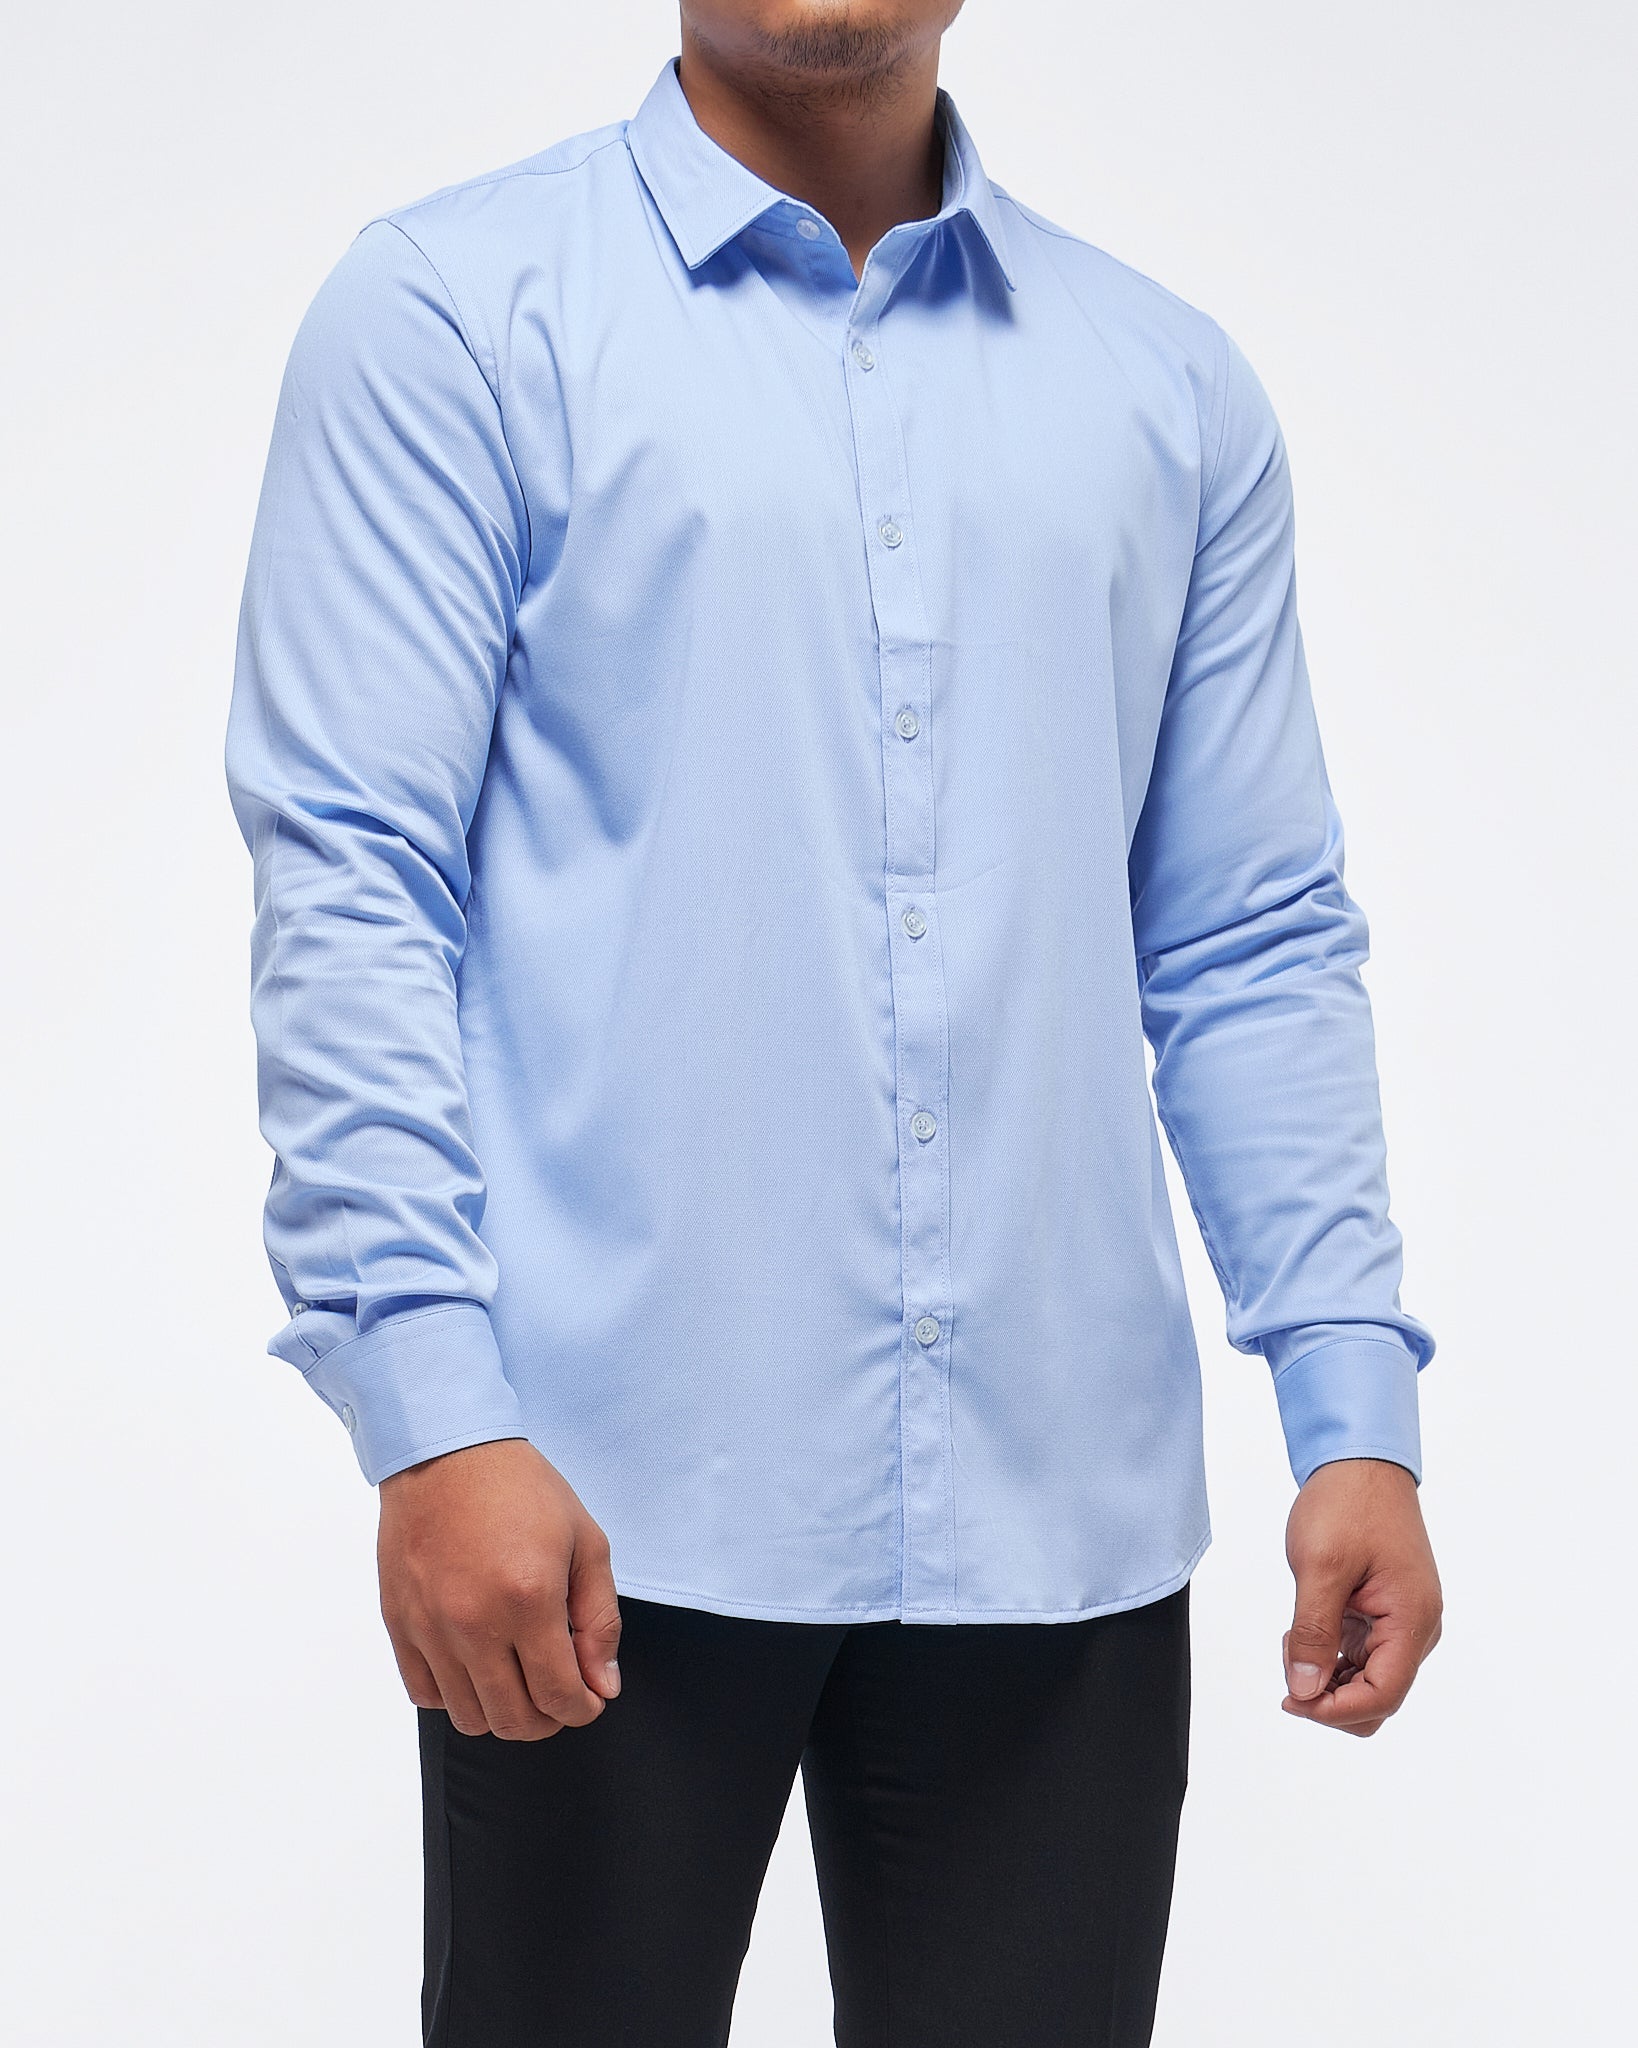 MOI OUTFIT-Slim Fit Men Shirts Long Sleeve 17.90